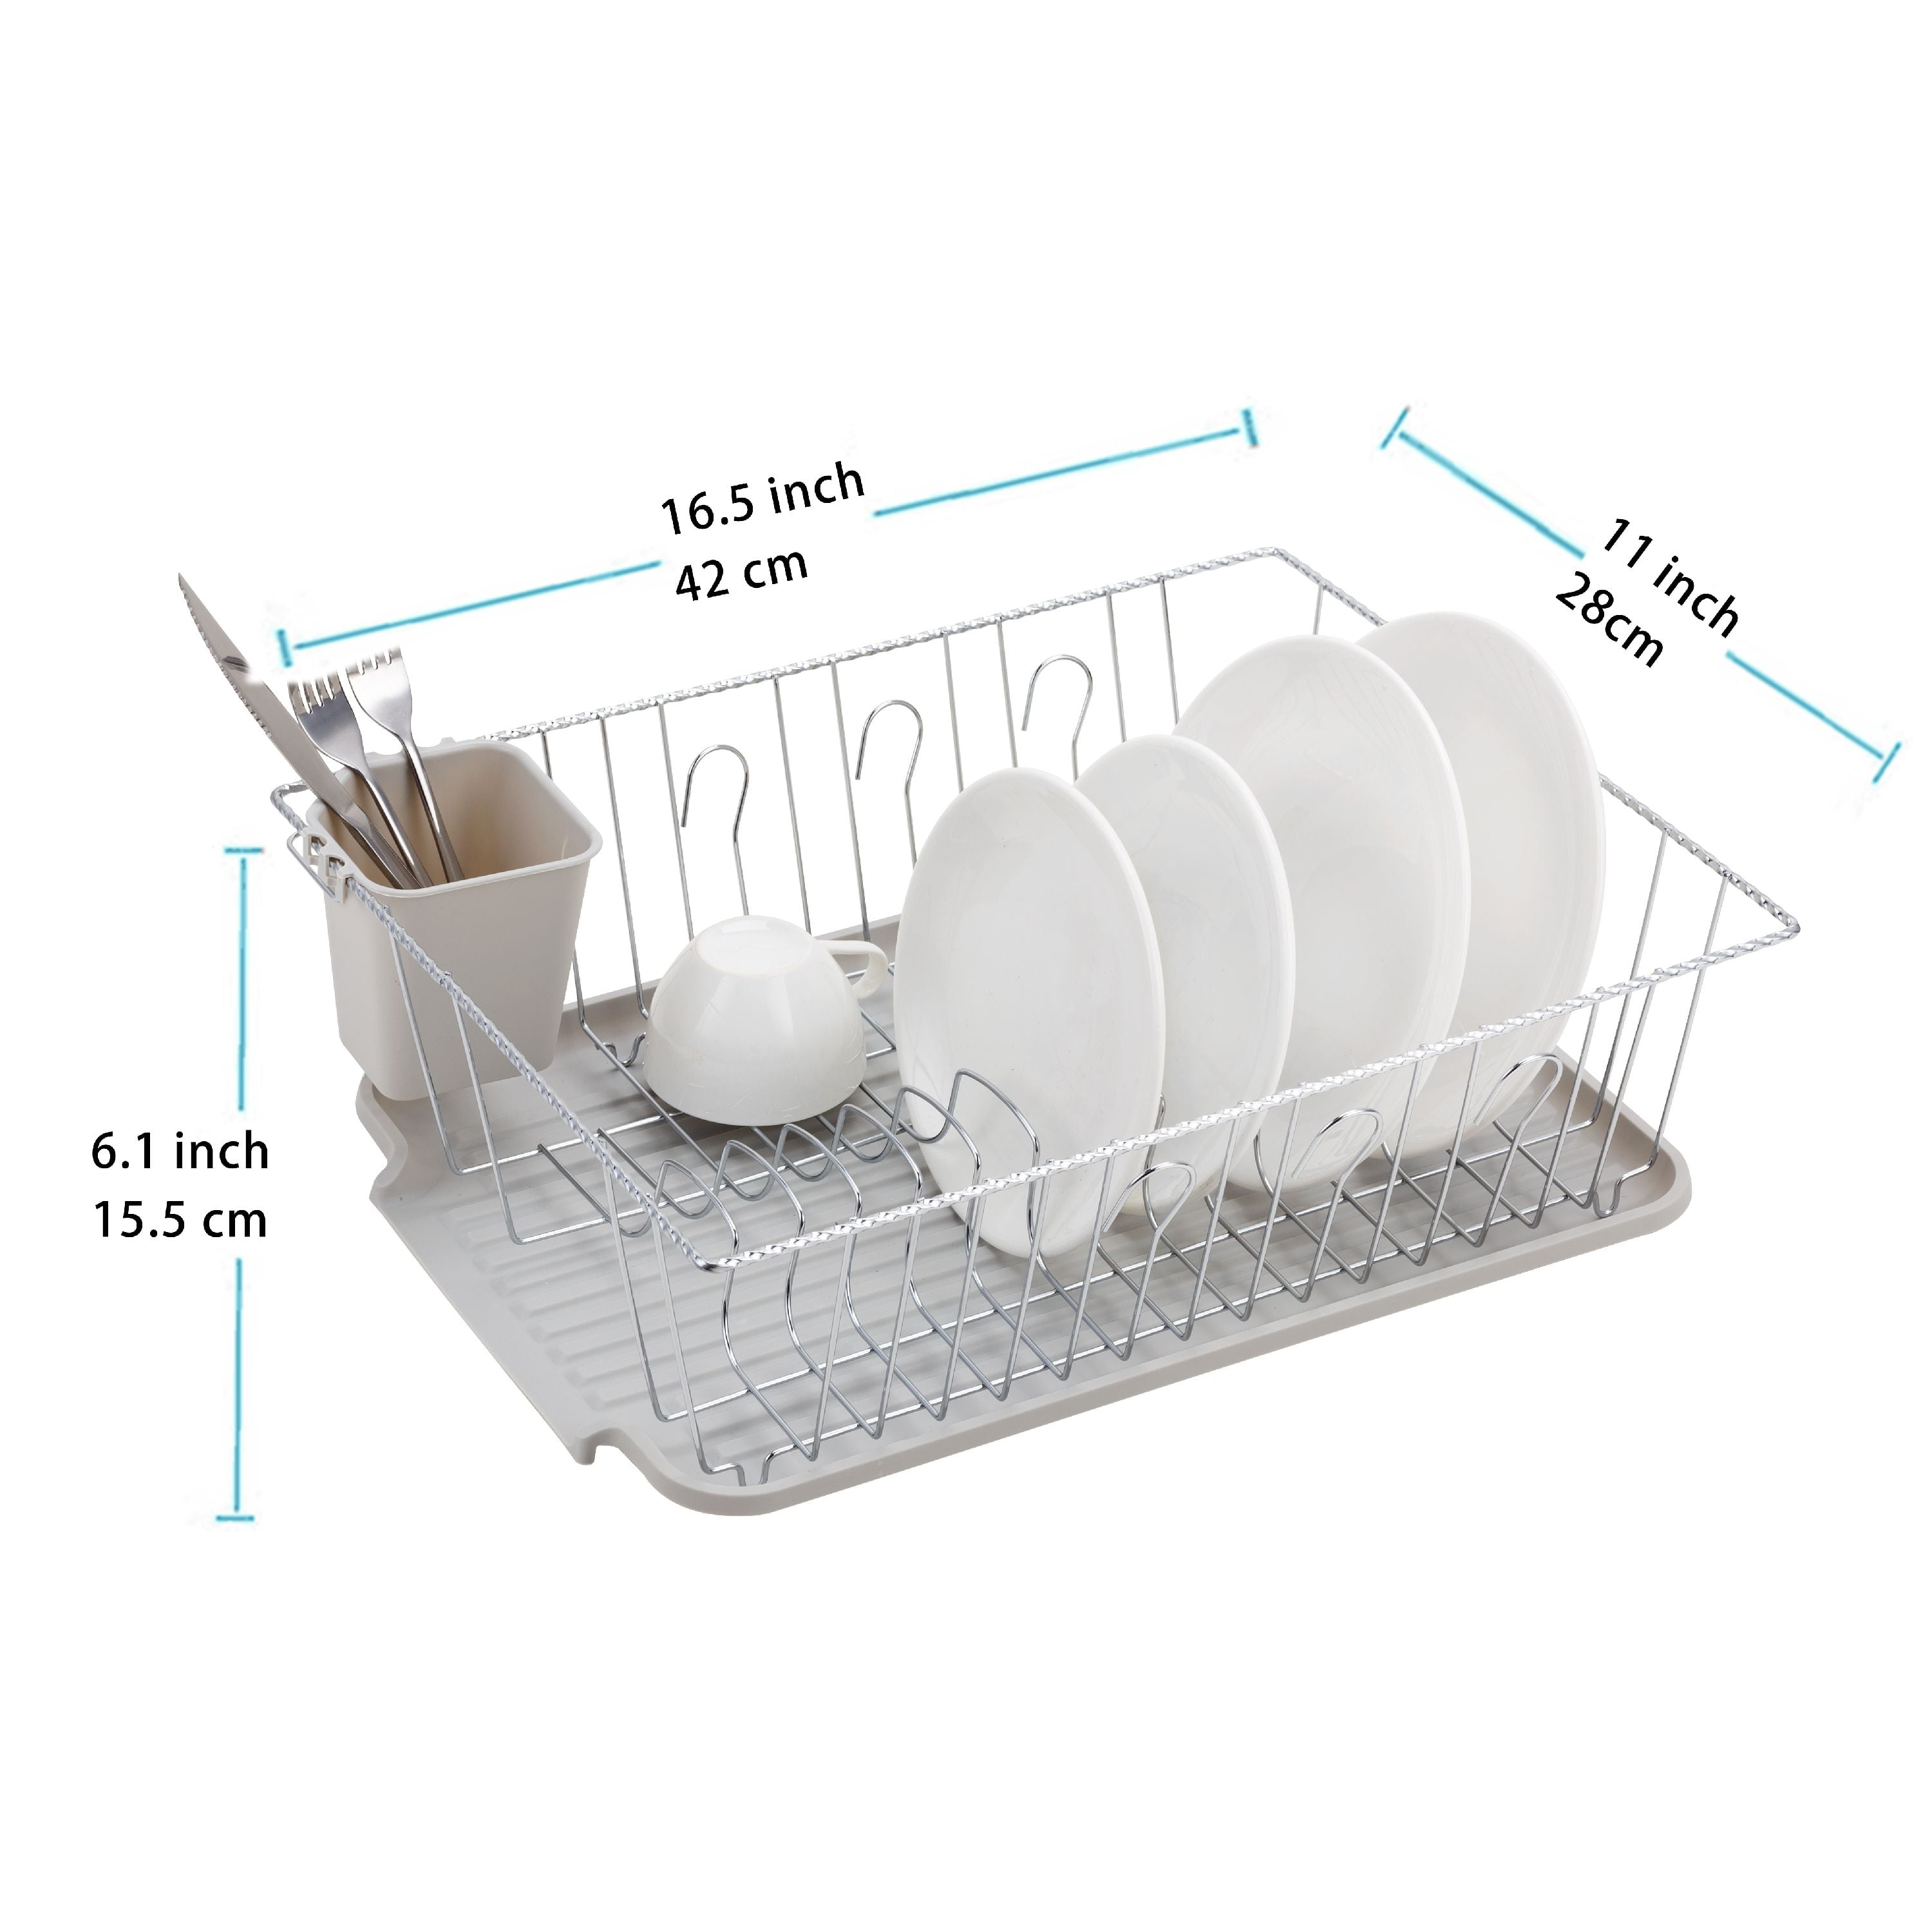 The Kitchen Sense Chrome 2 Tier Deluxe Dish Drying Rack with Drain Tray 